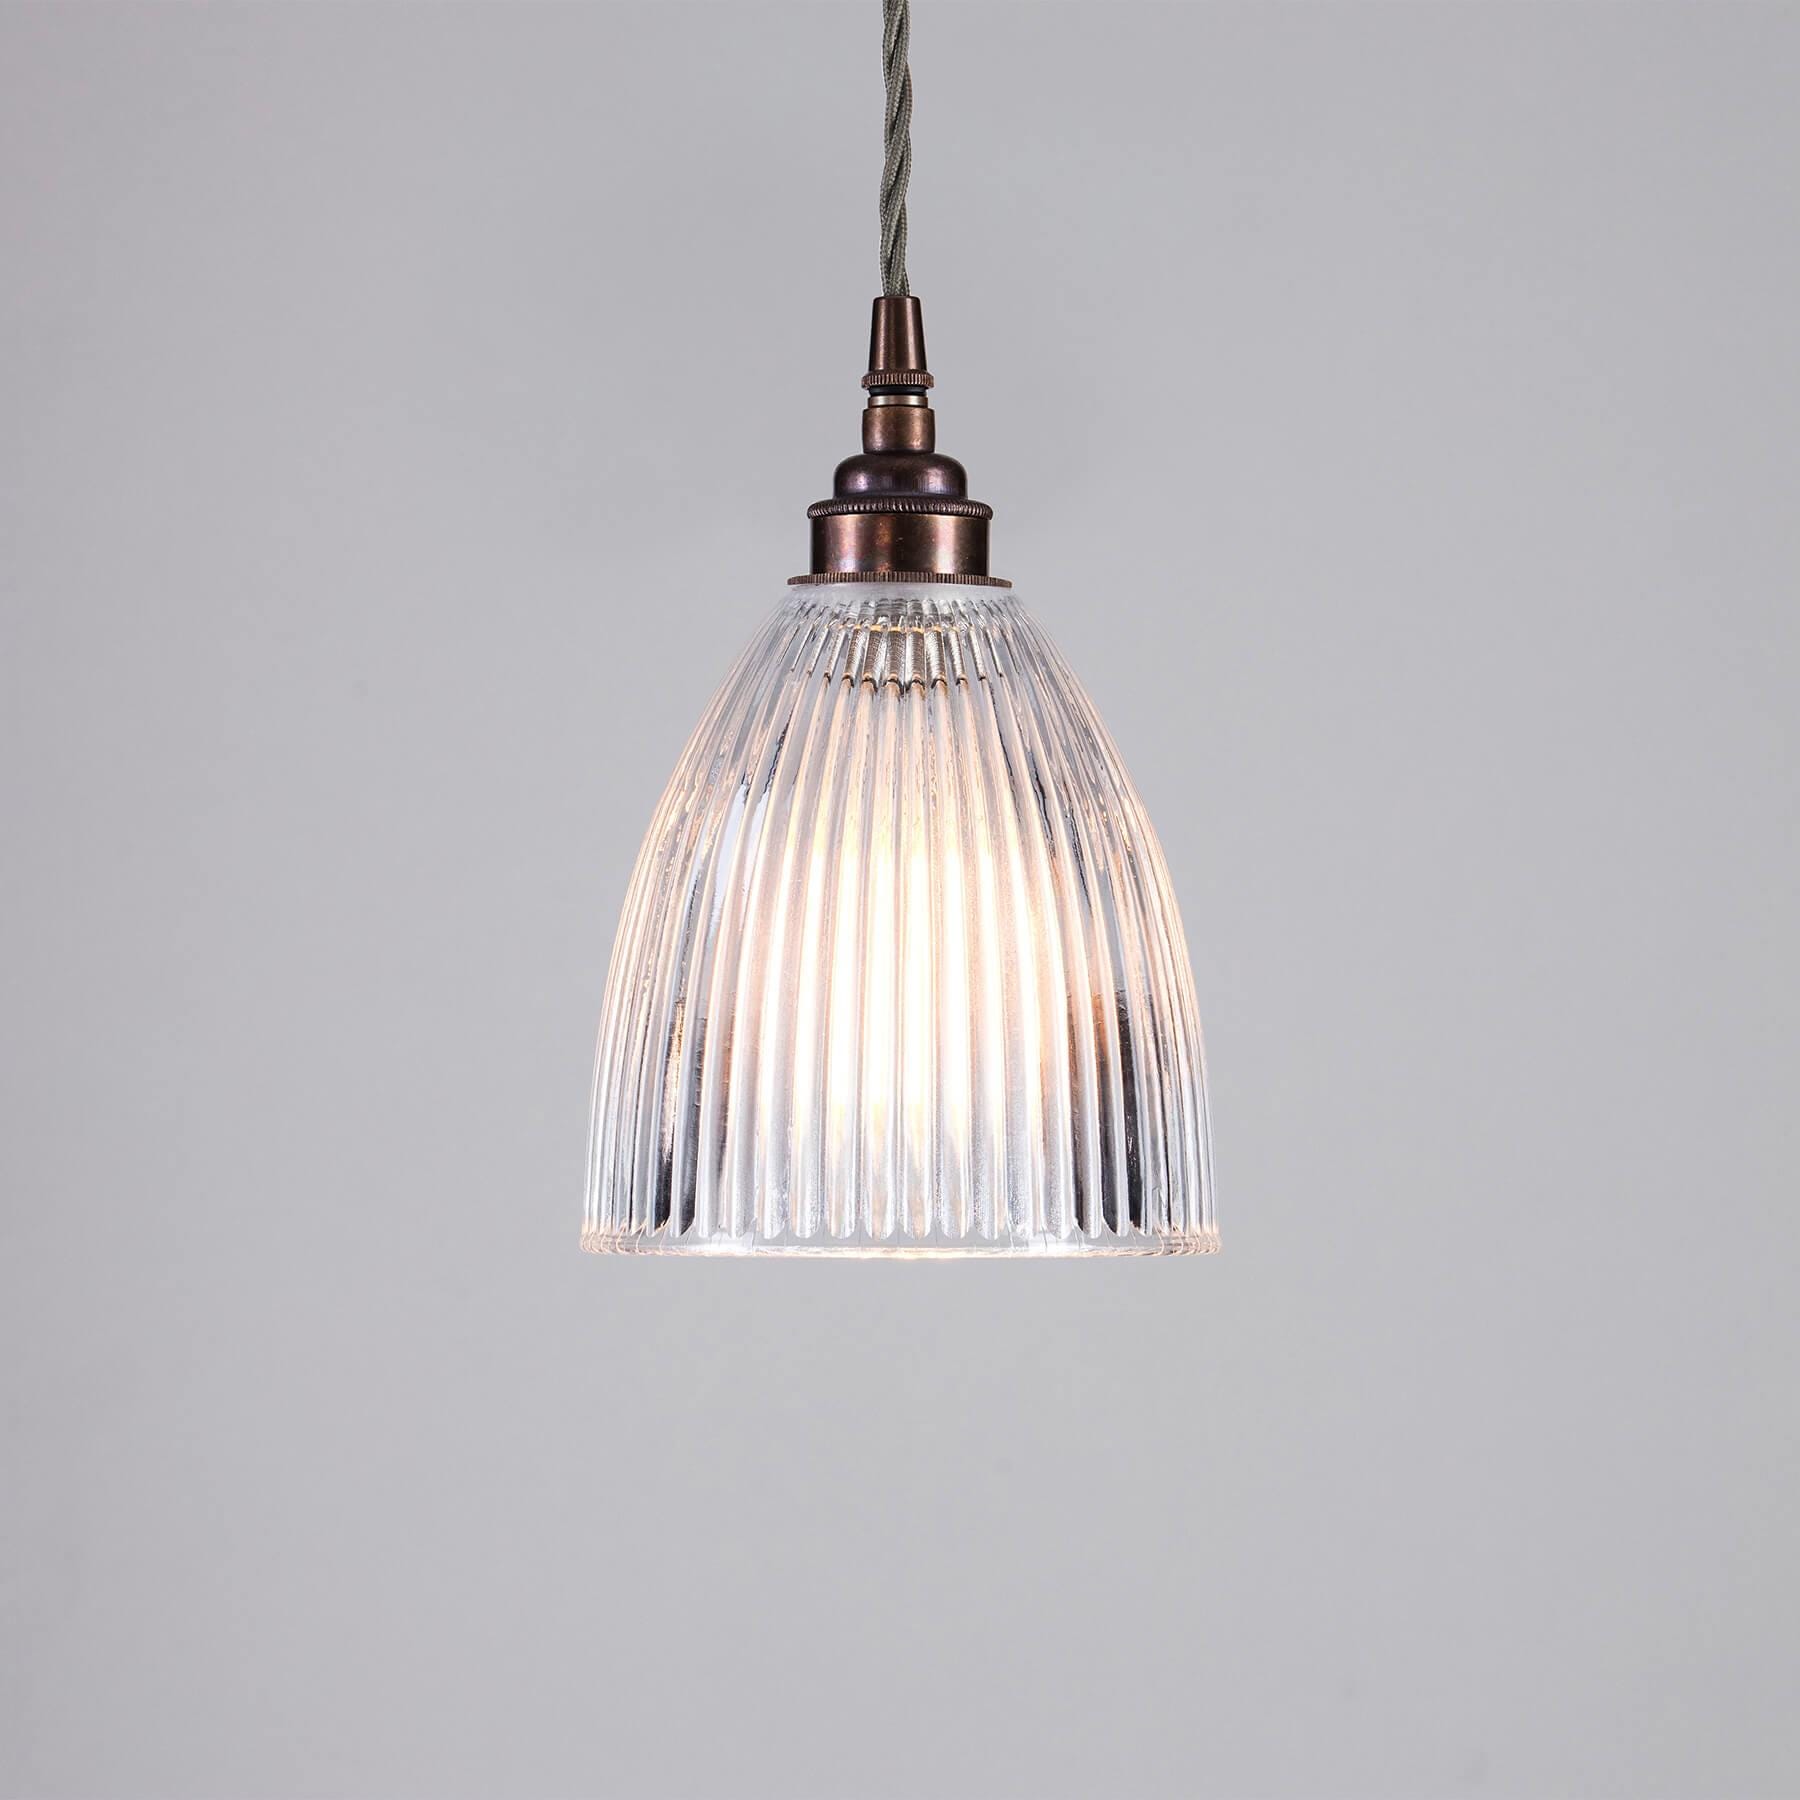 Old School Electric Black Friday Exclusive Elongated Prismatic Pendant Light With Coloured Flex Small Antique Brass Fittings And Grey Flex Clea